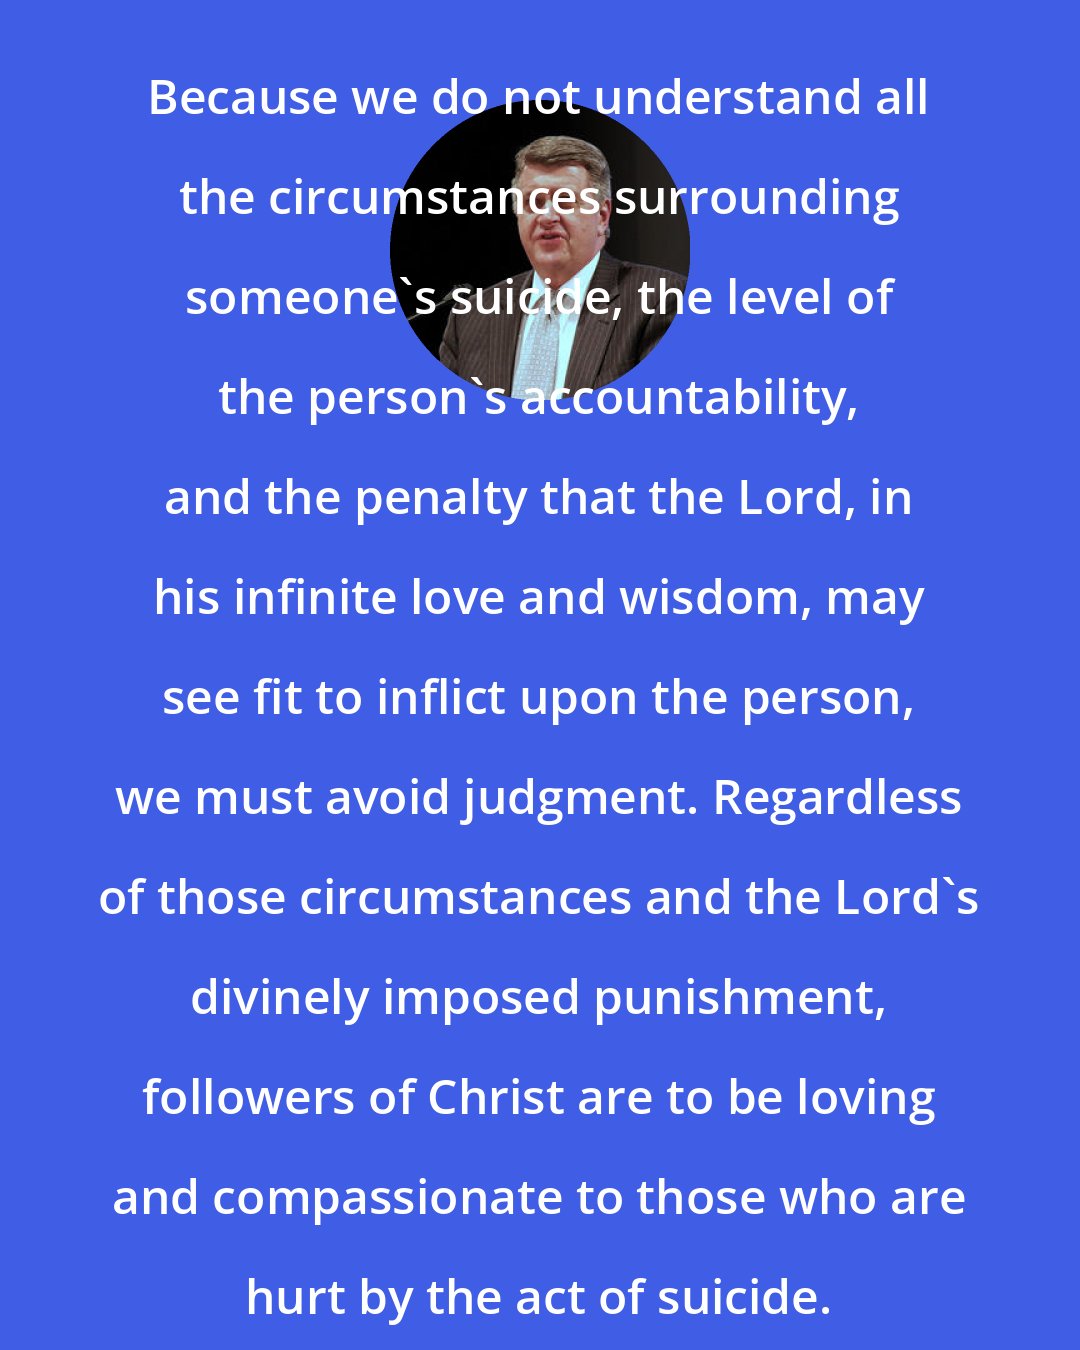 Brent L. Top: Because we do not understand all the circumstances surrounding someone's suicide, the level of the person's accountability, and the penalty that the Lord, in his infinite love and wisdom, may see fit to inflict upon the person, we must avoid judgment. Regardless of those circumstances and the Lord's divinely imposed punishment, followers of Christ are to be loving and compassionate to those who are hurt by the act of suicide.